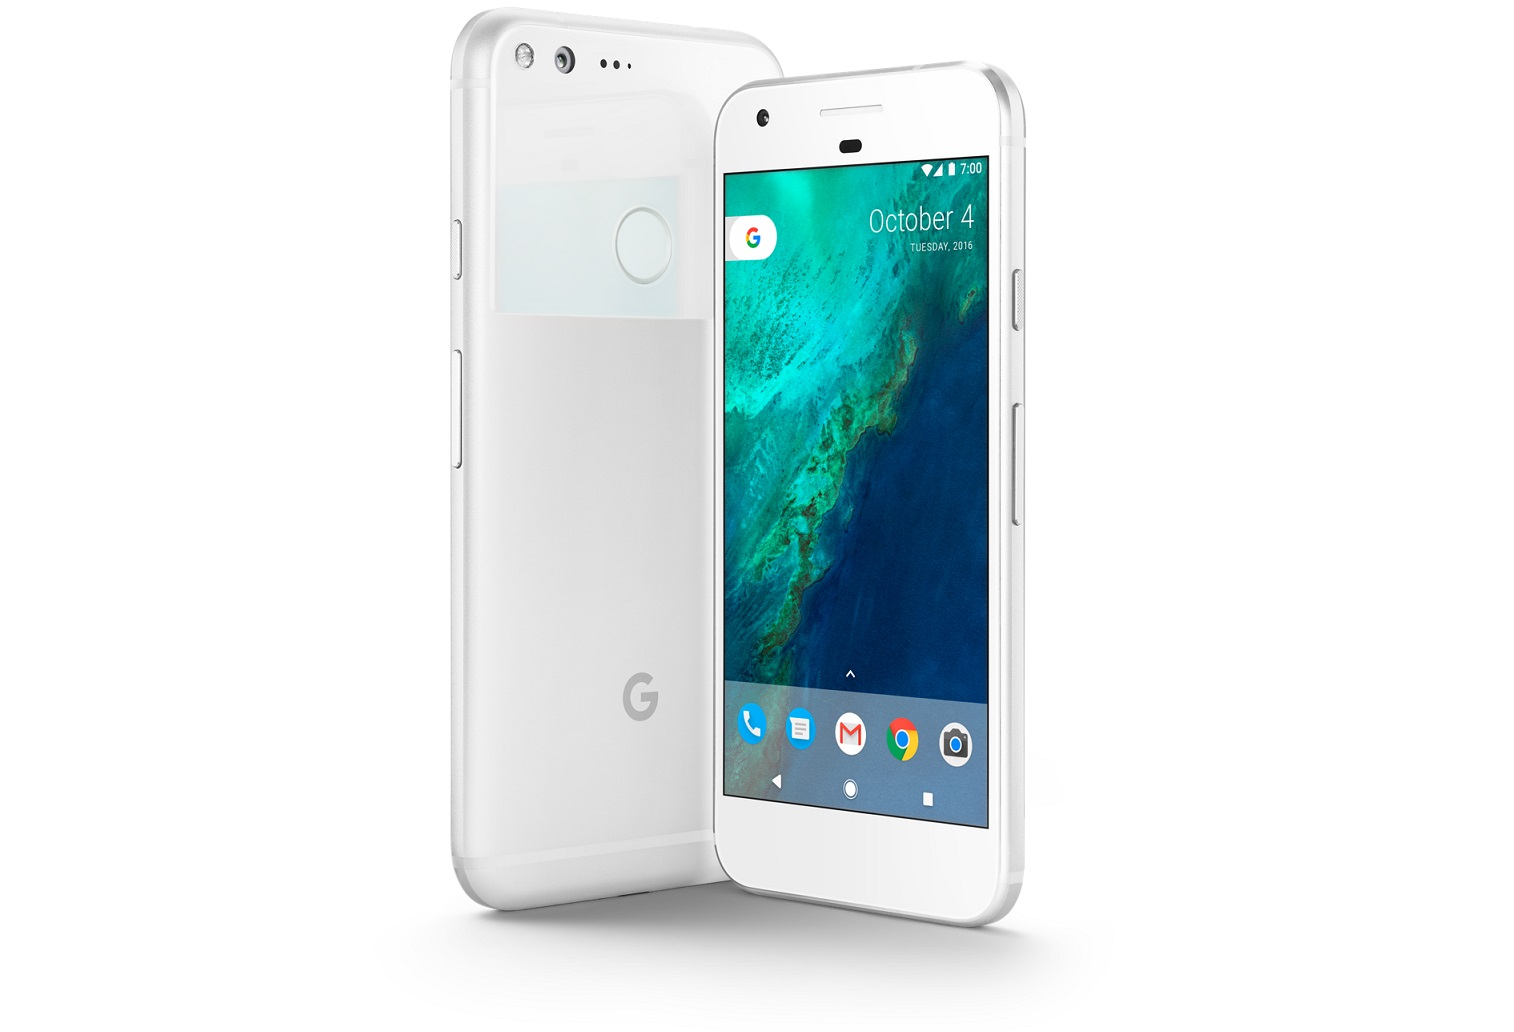 Analyst Projects Google to Sell 3-4 Million Pixel Smartphones in 2016